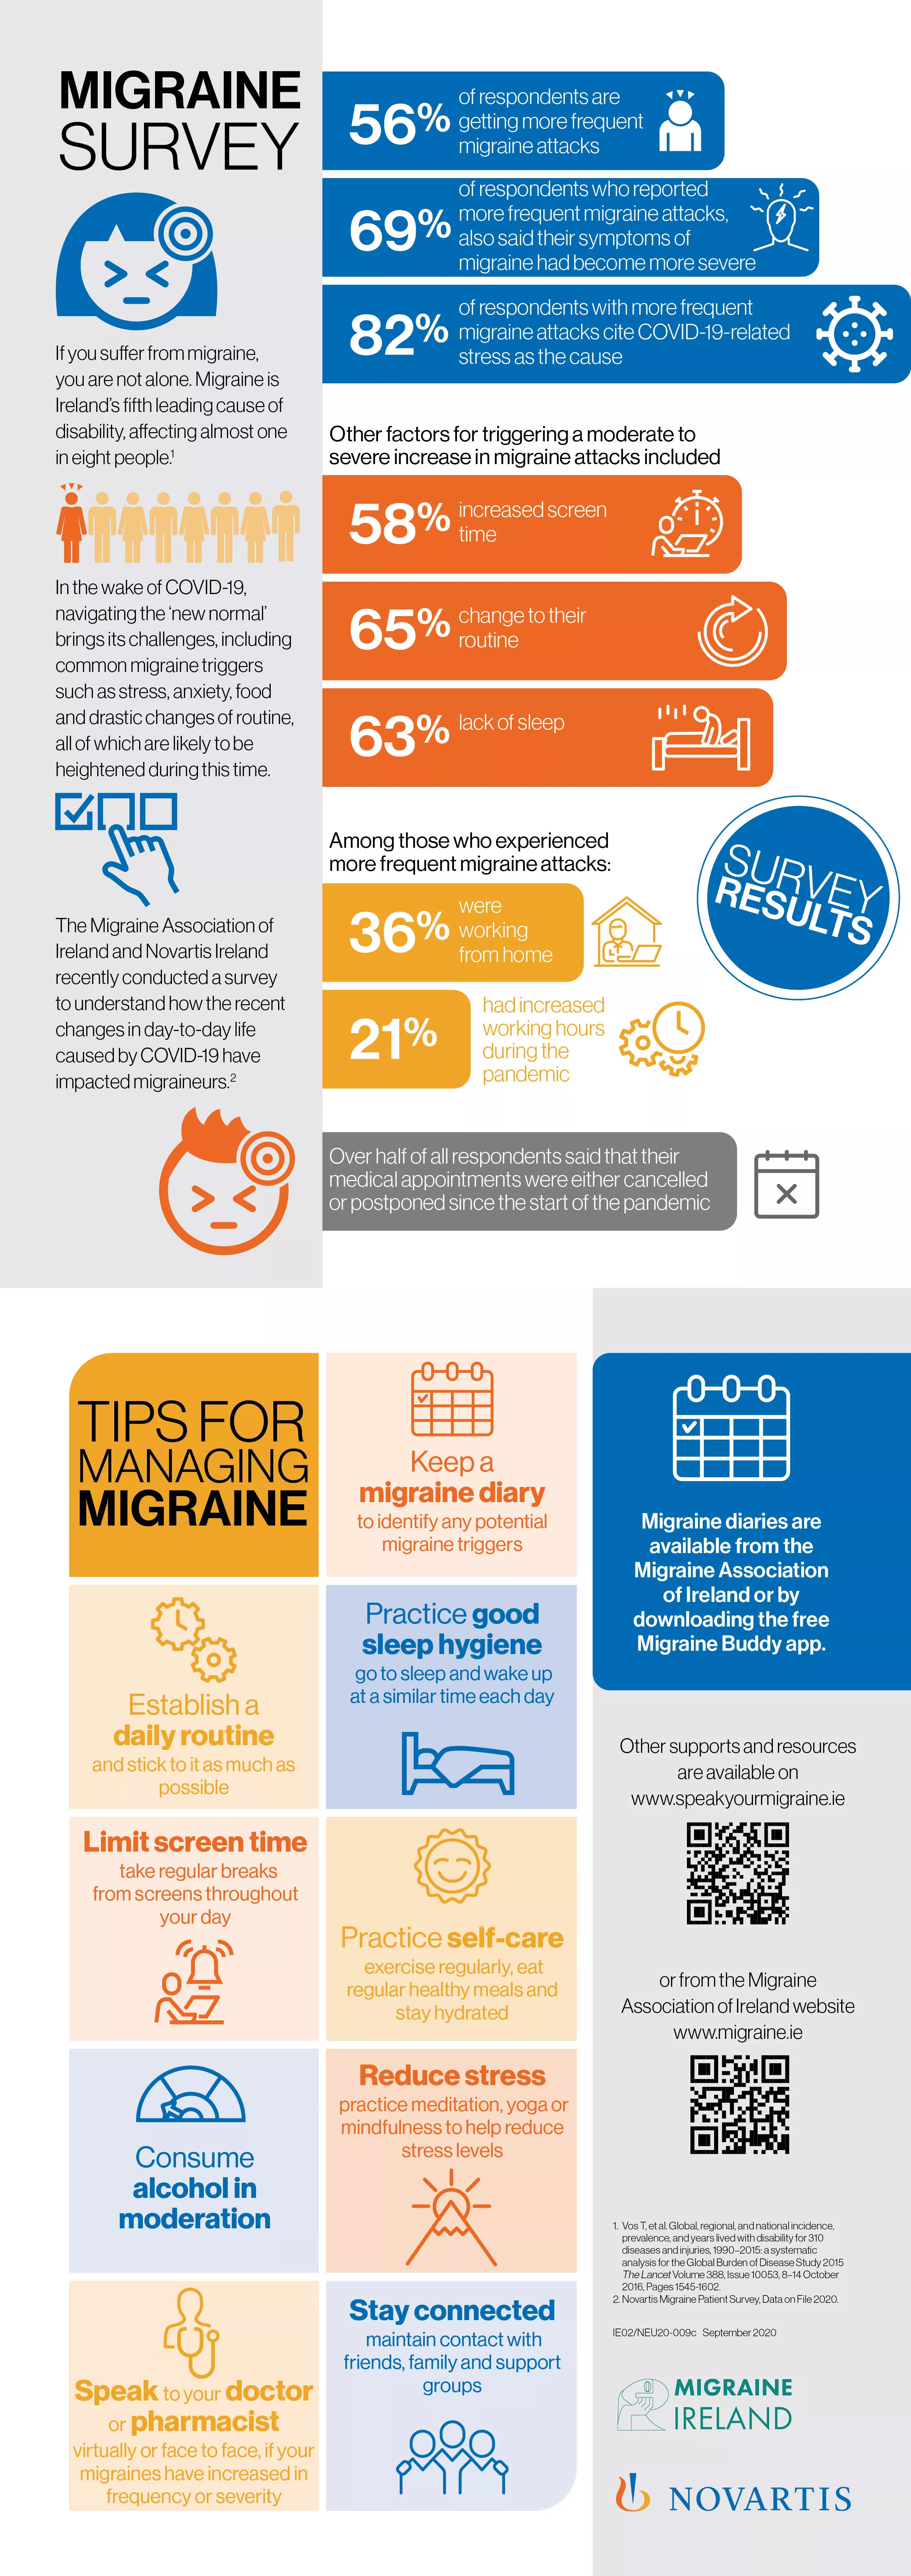 Migraine Survey Results and Tips for Managing Migraine